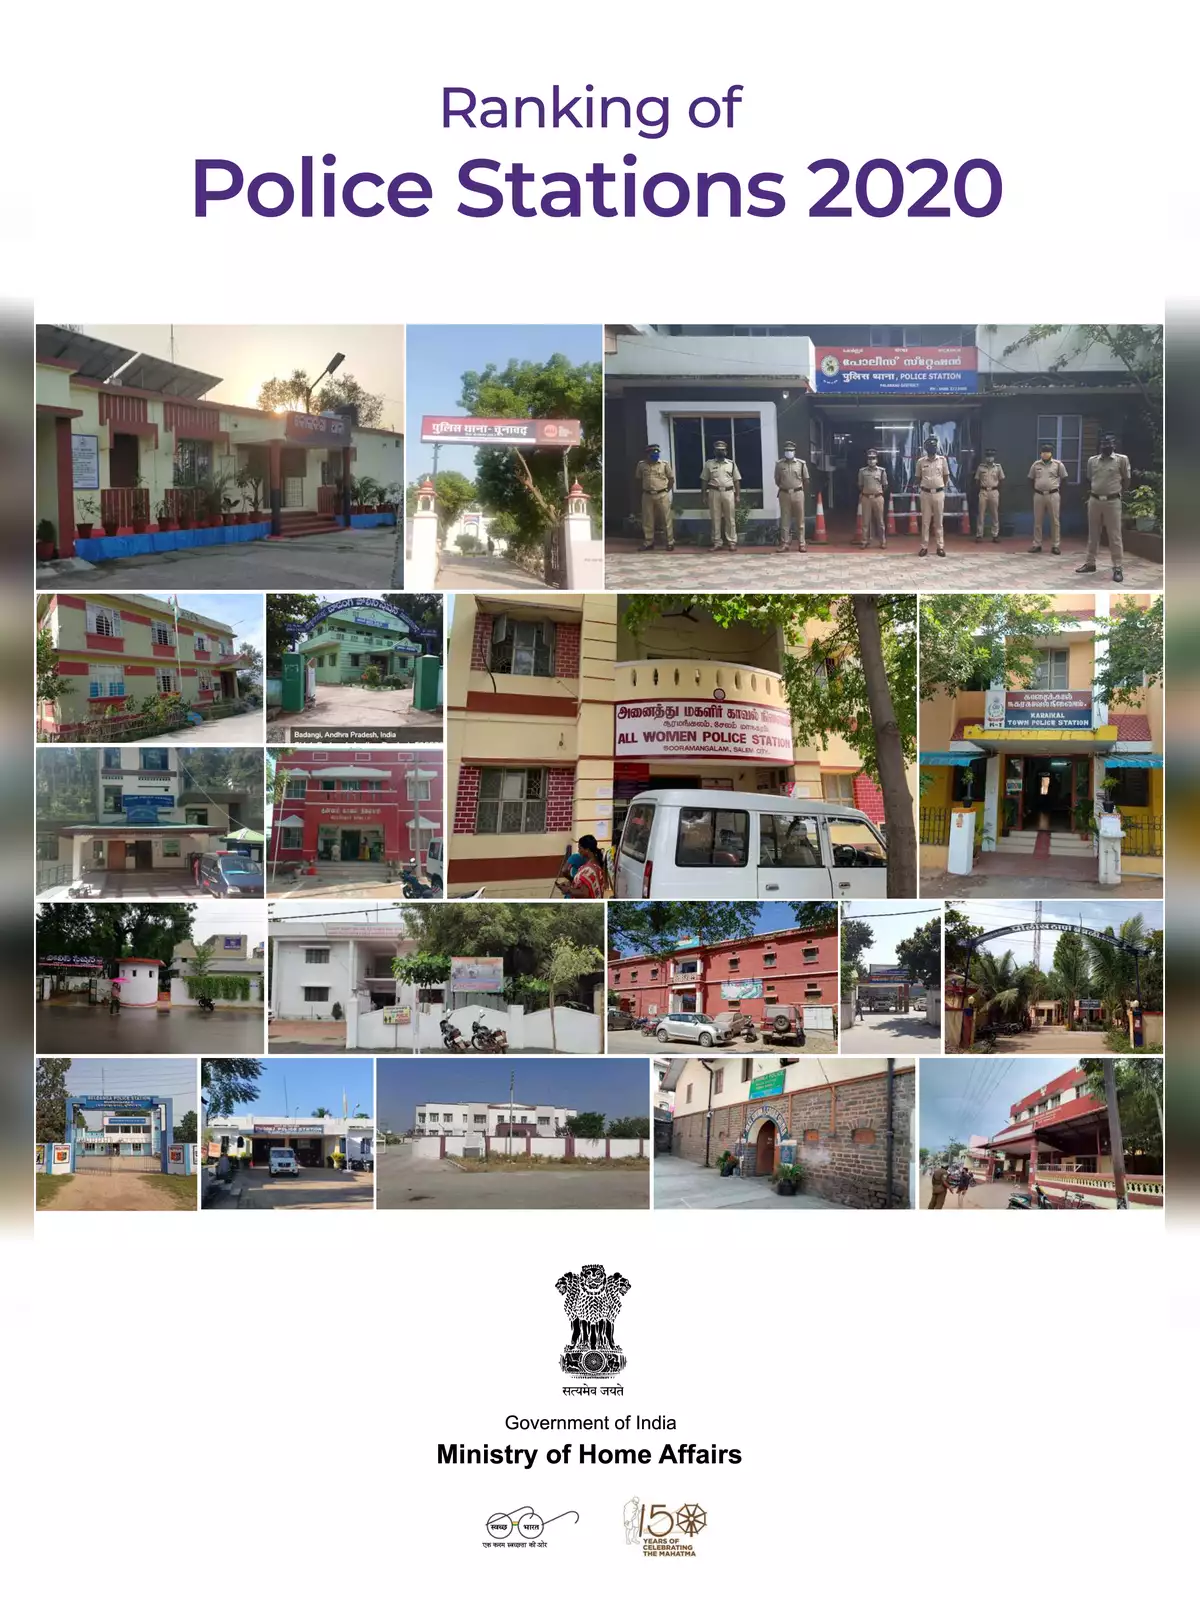 Police Stations Ranking 2020